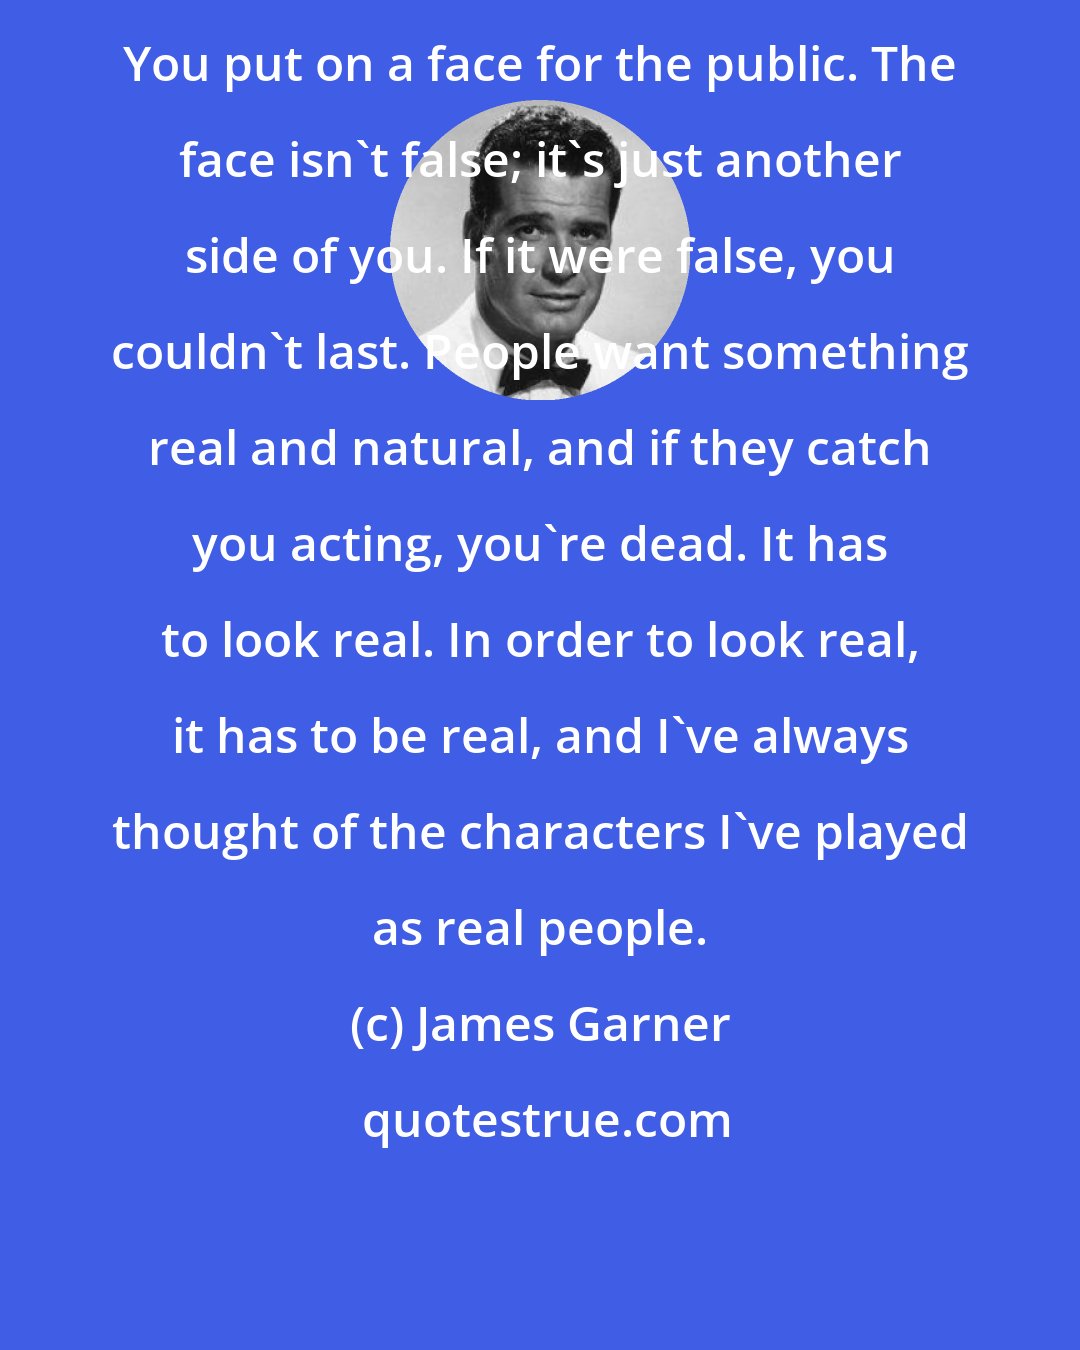 James Garner: You put on a face for the public. The face isn't false; it's just another side of you. If it were false, you couldn't last. People want something real and natural, and if they catch you acting, you're dead. It has to look real. In order to look real, it has to be real, and I've always thought of the characters I've played as real people.